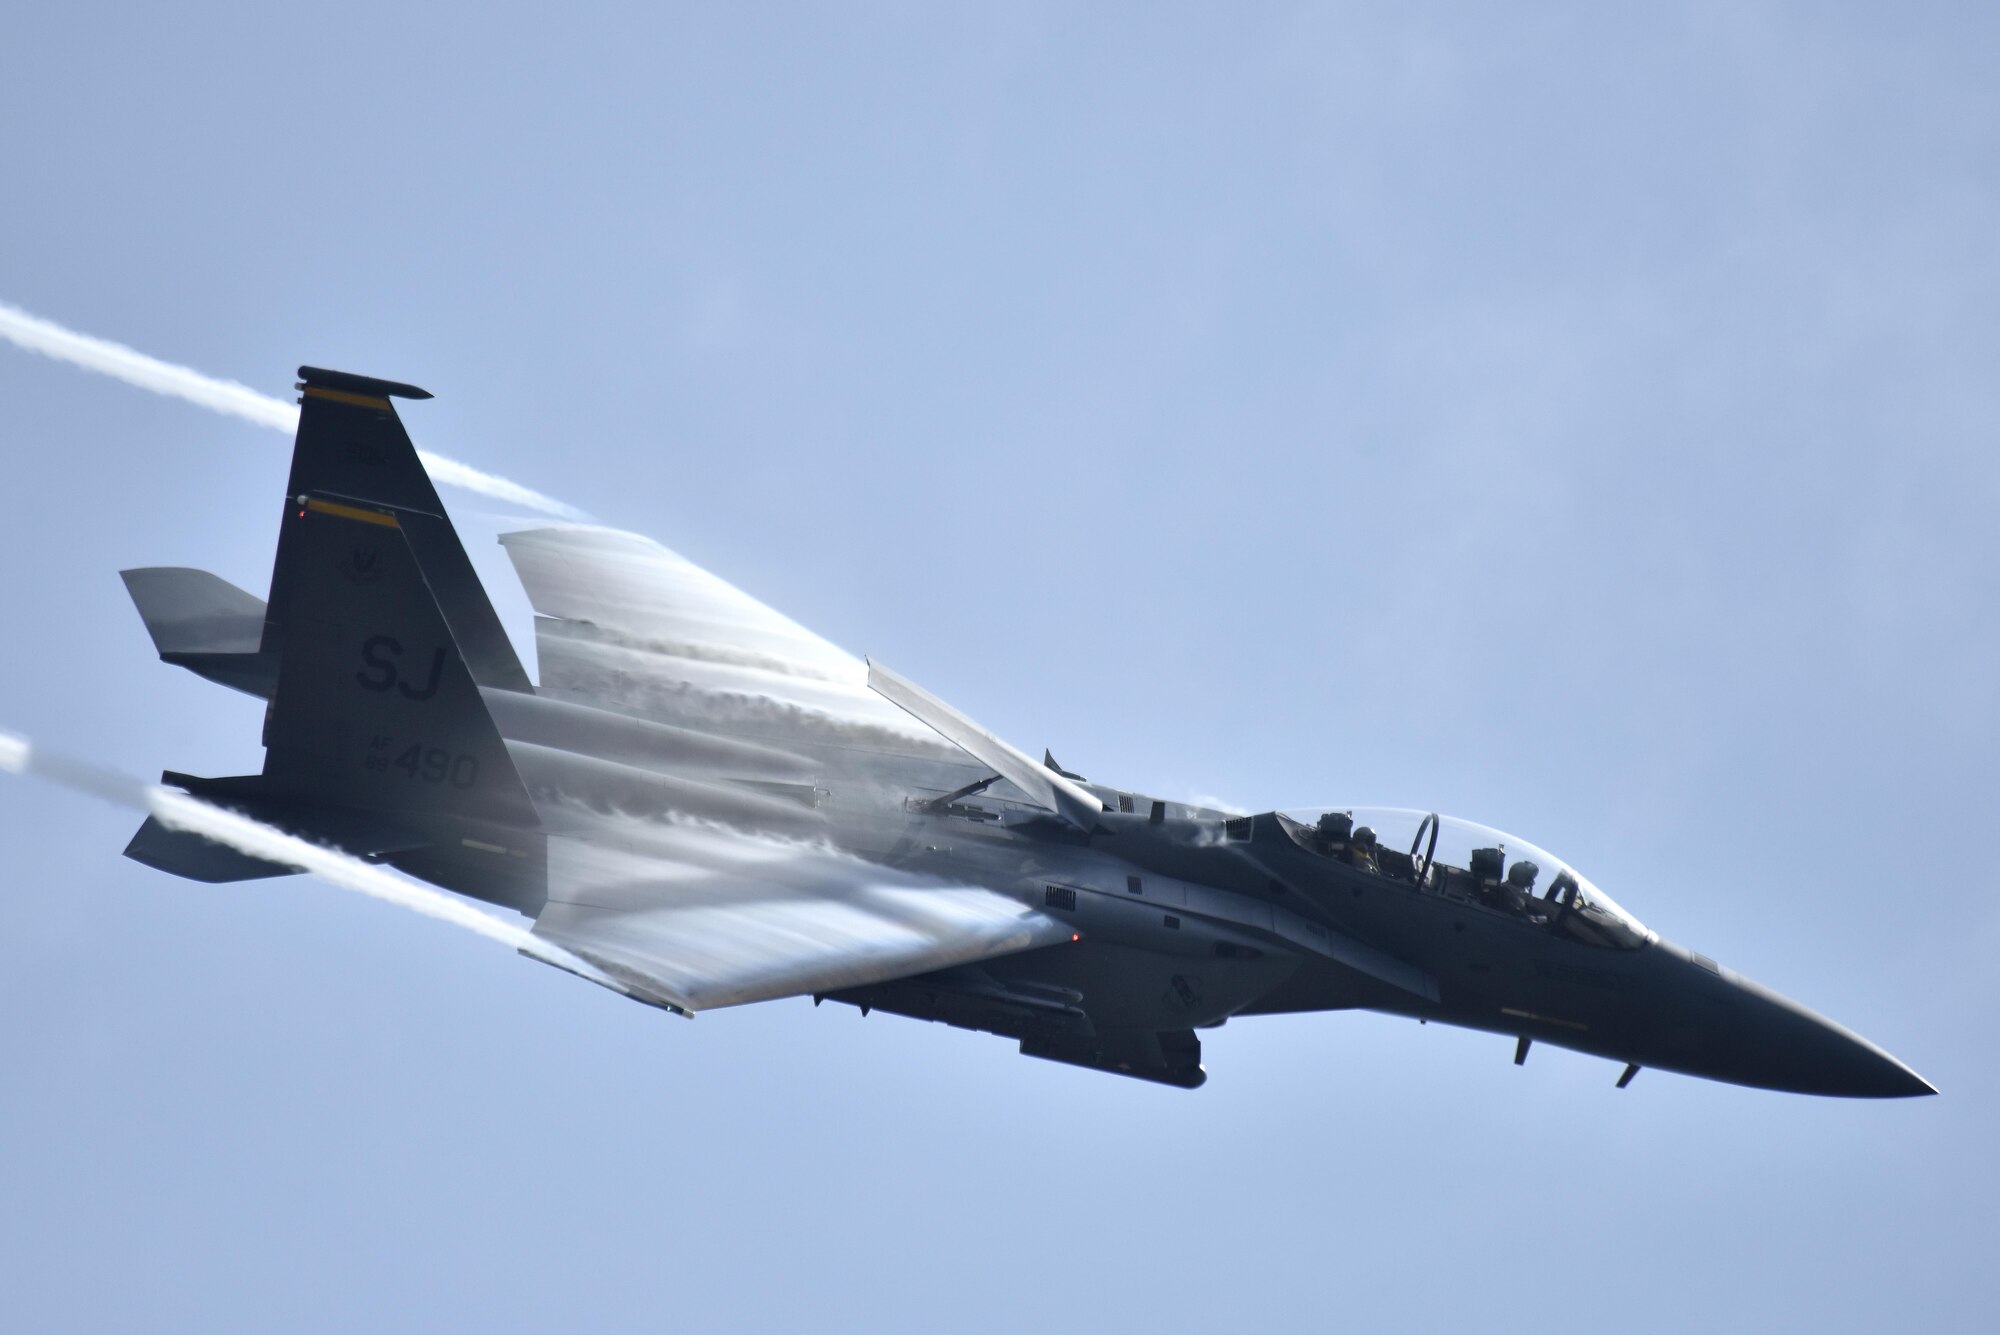 An F-15E Strike Eagle streaks through the sky while performing for those in attendance during the Wings Over Wayne Air Show, May 21, 2017, at Seymour Johnson Air Force Base, N.C. (U.S. Air Force photo/Airman 1st Class Christopher Maldonado)